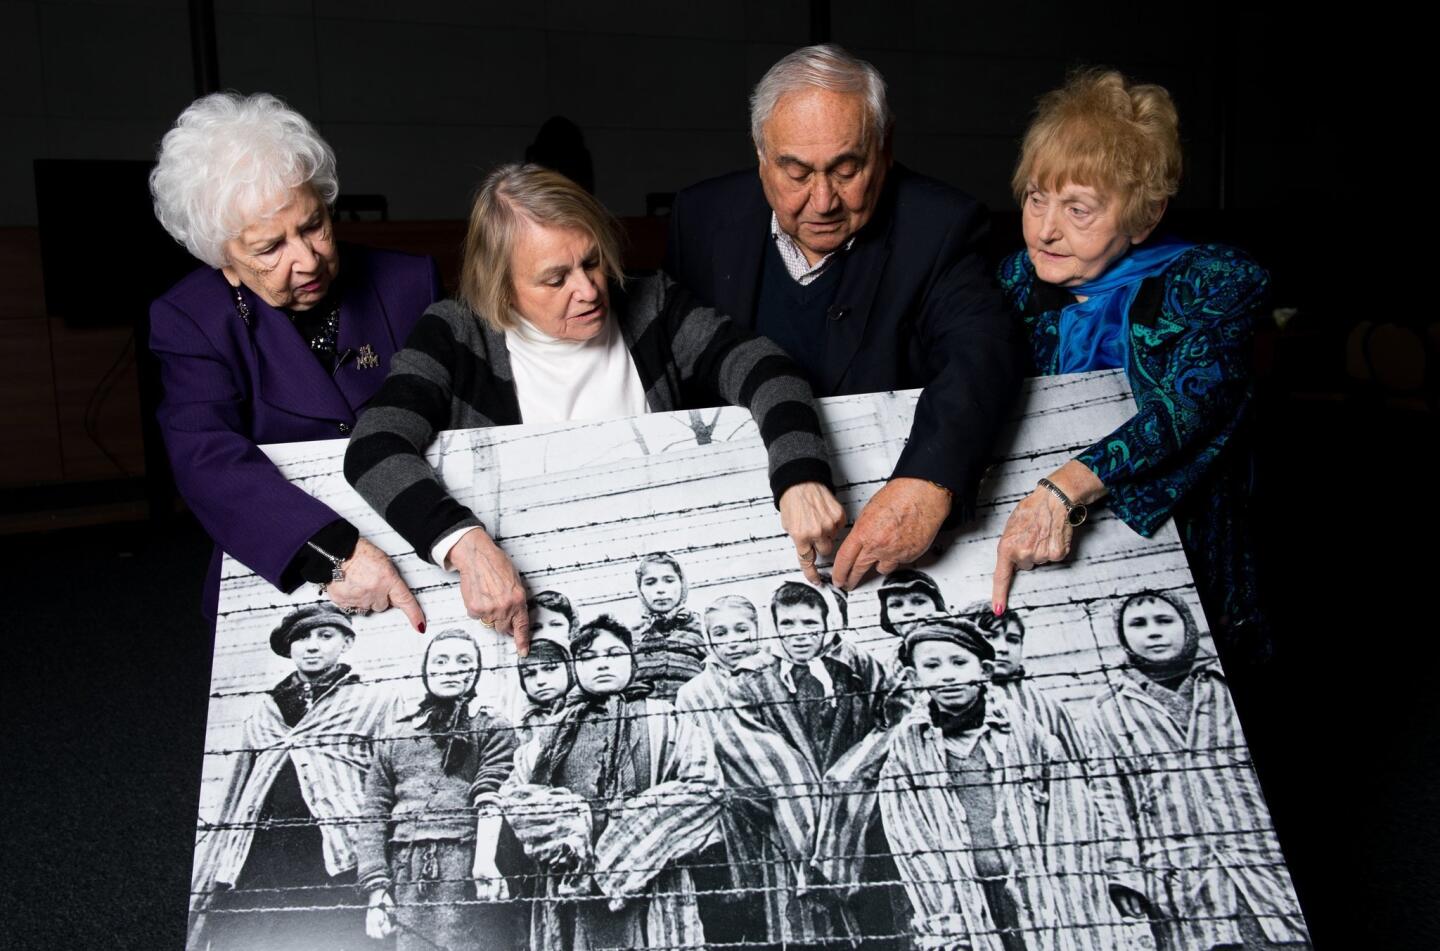 Survivors with photo of themselves at Auschwitz